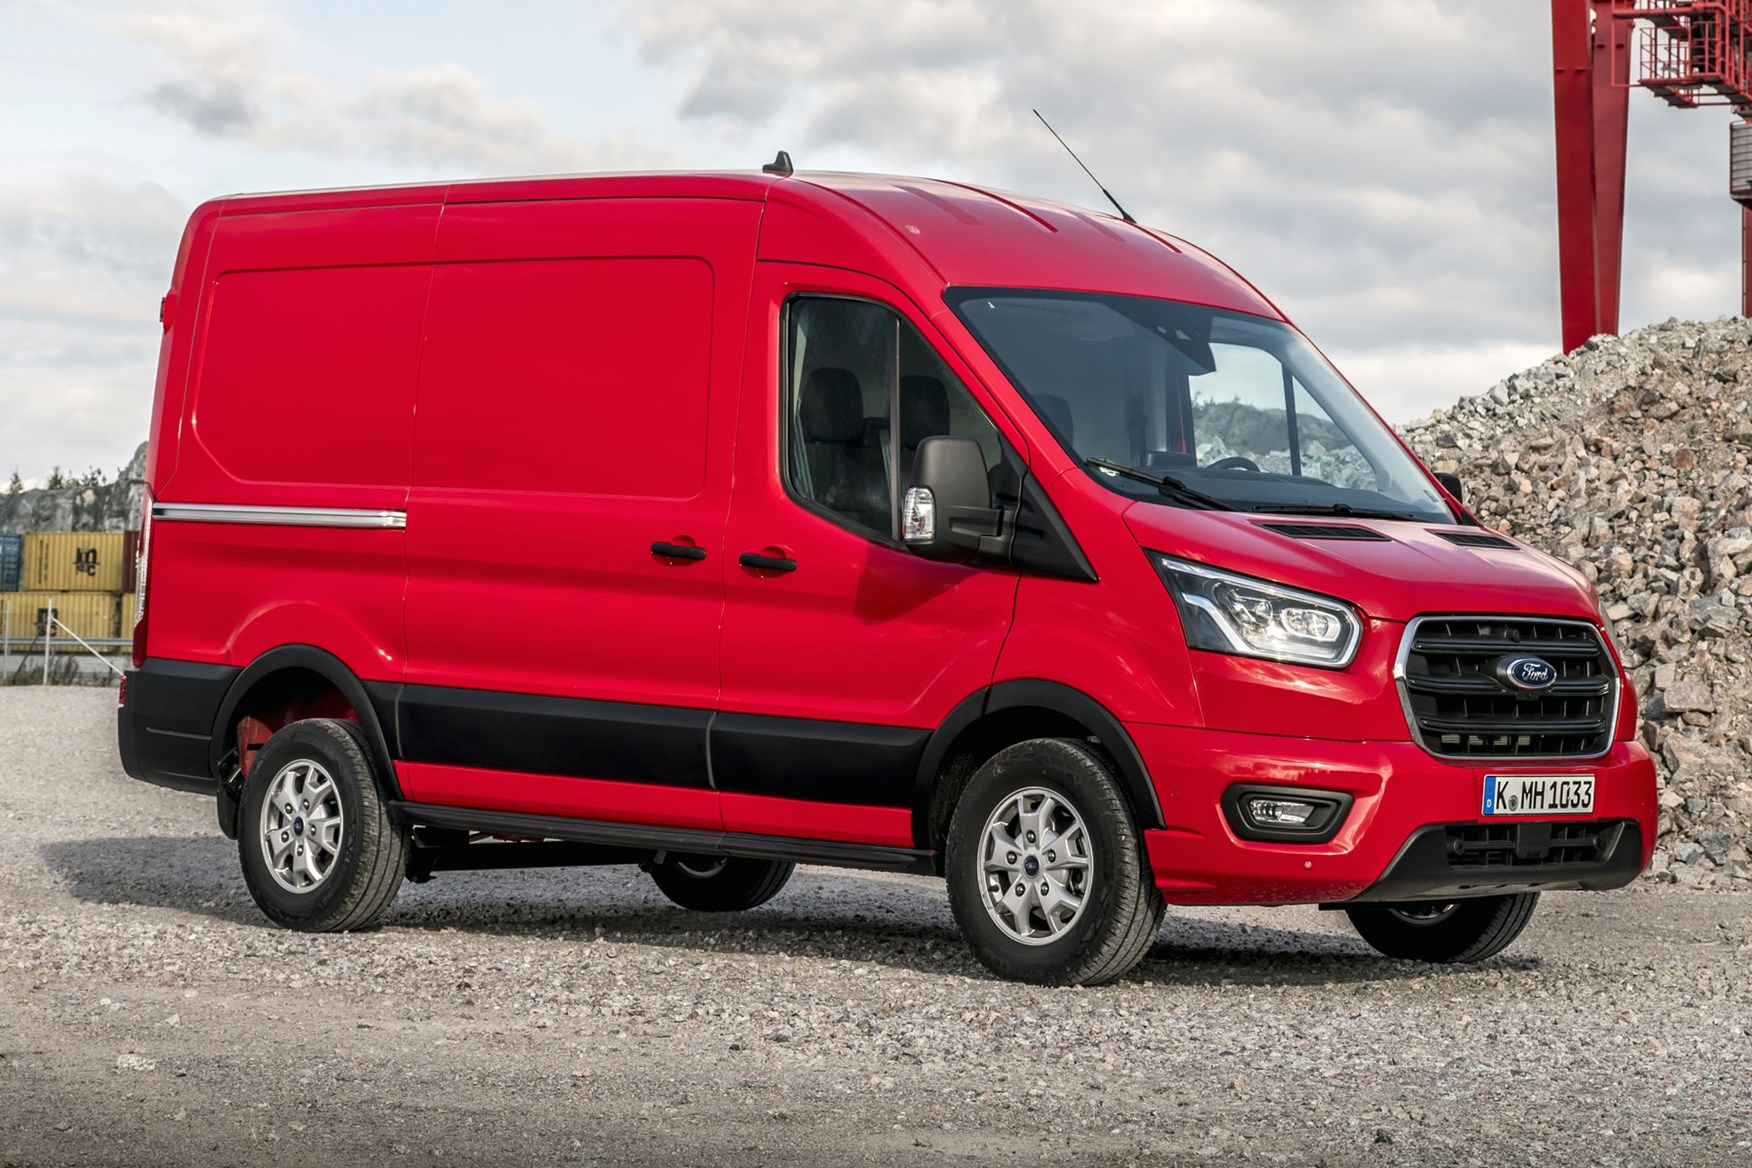 Ford Transit dimensions - 2019 facelift model, front view, panel van, red